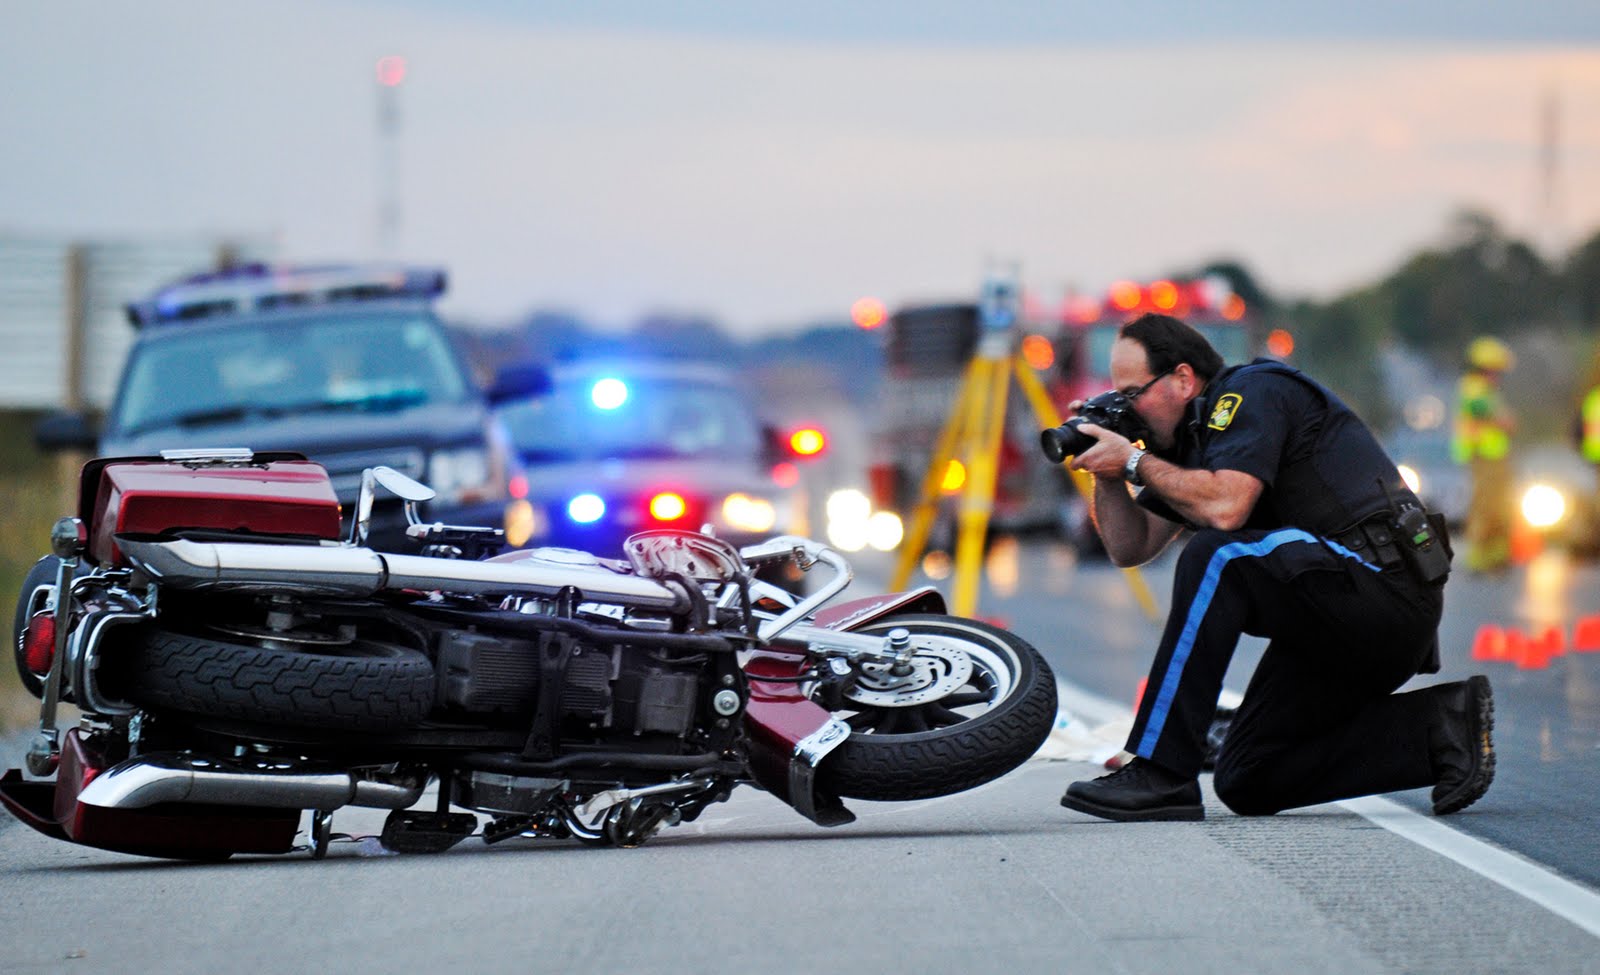 Why You Need a Skilled Motorcycle Accident Lawyer on Your Side After a Crash